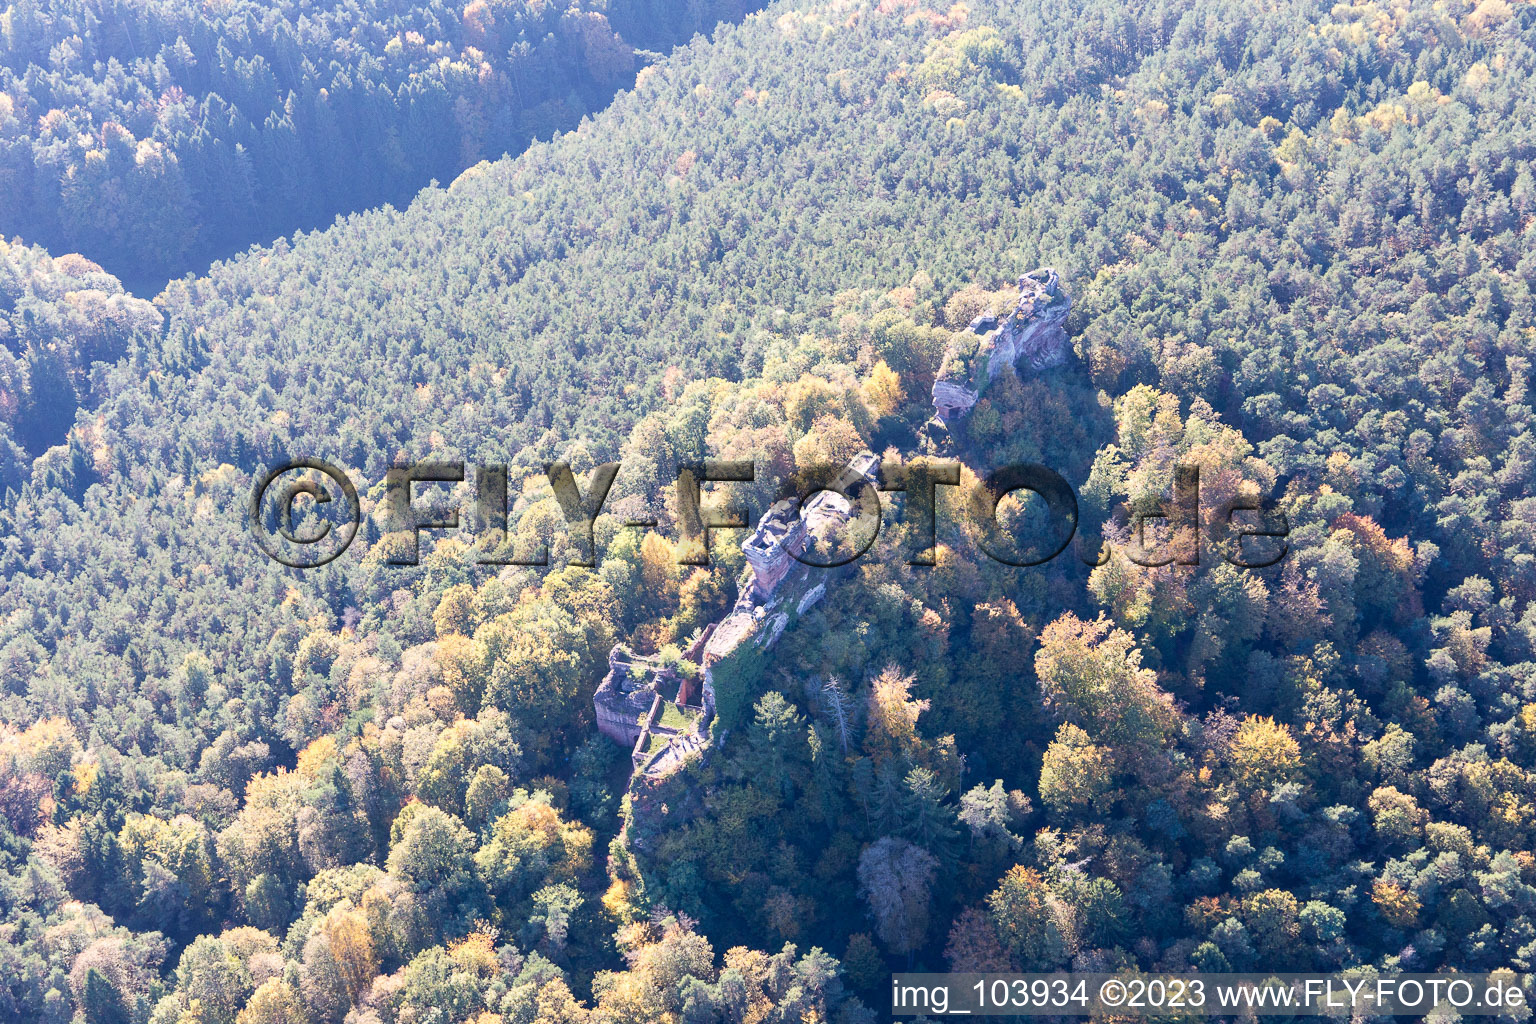 Drone image of Drachenfels castle ruins in Busenberg in the state Rhineland-Palatinate, Germany